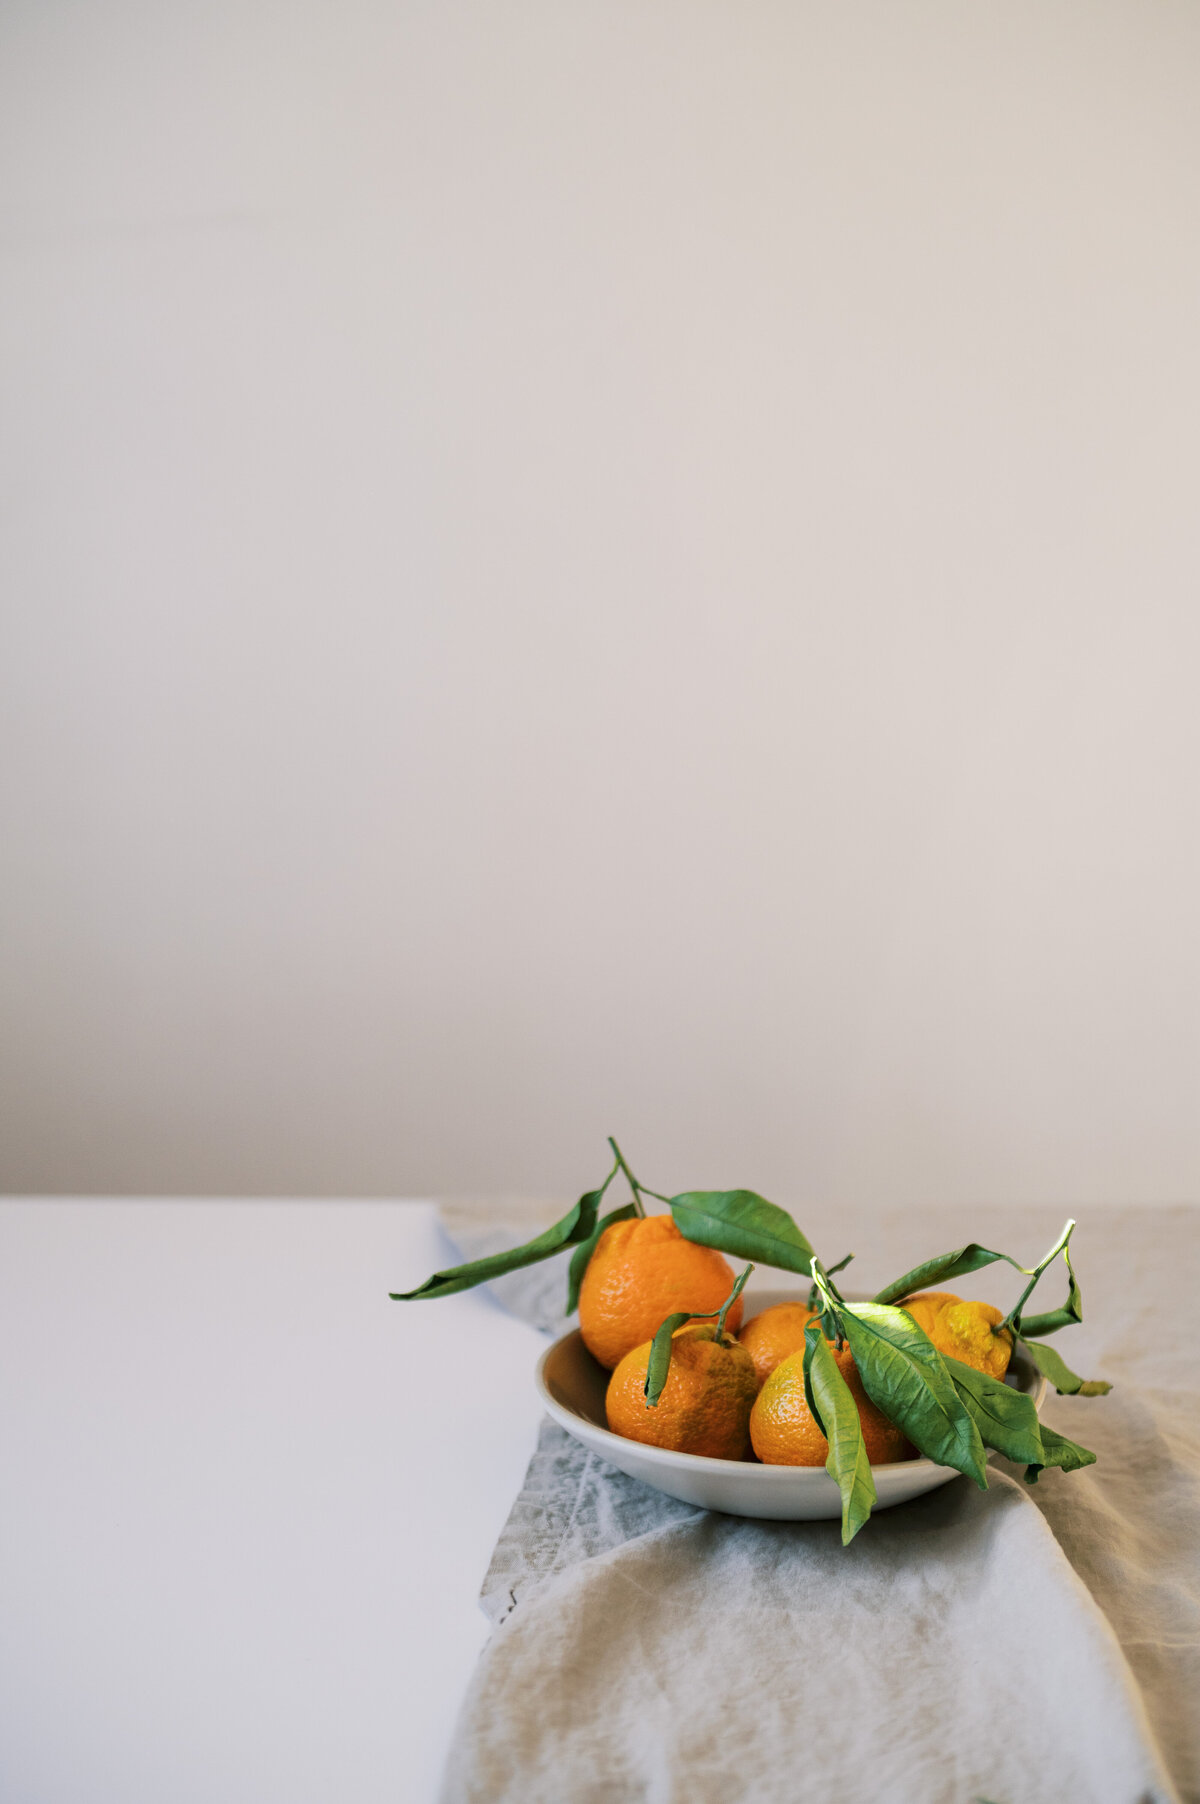 White bowl full of clementine oranges sitting on linen cloth